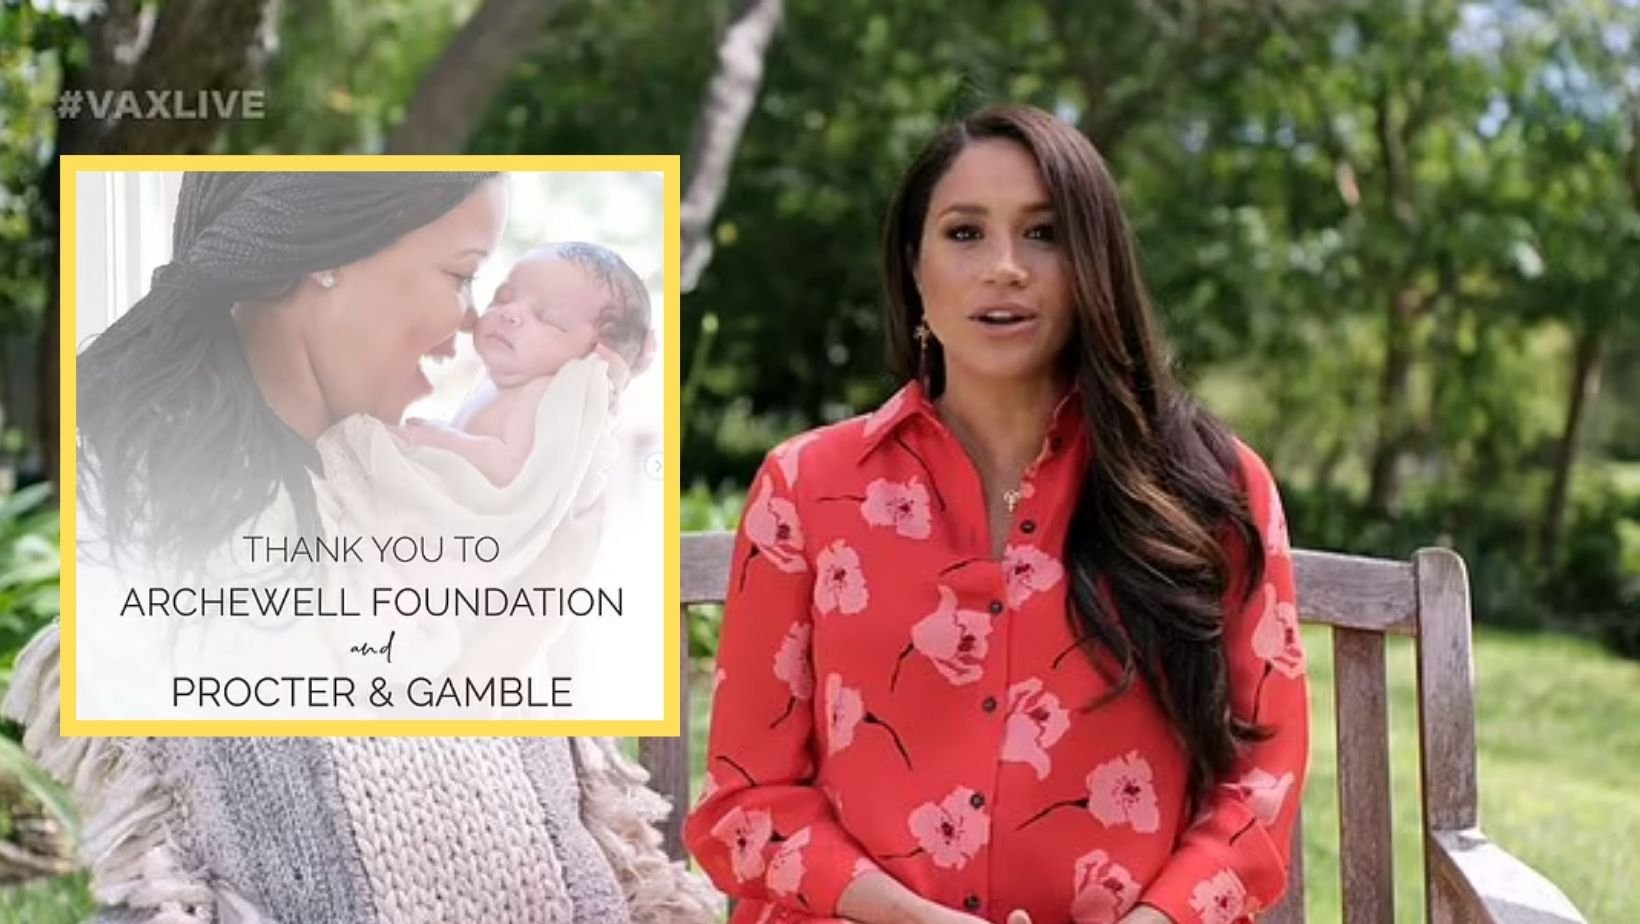 1 50.jpg?resize=1200,630 - Meghan Markle Celebrates Mother's Day By Donating Diapers To Homeless, Pregnant Women & Their Babies